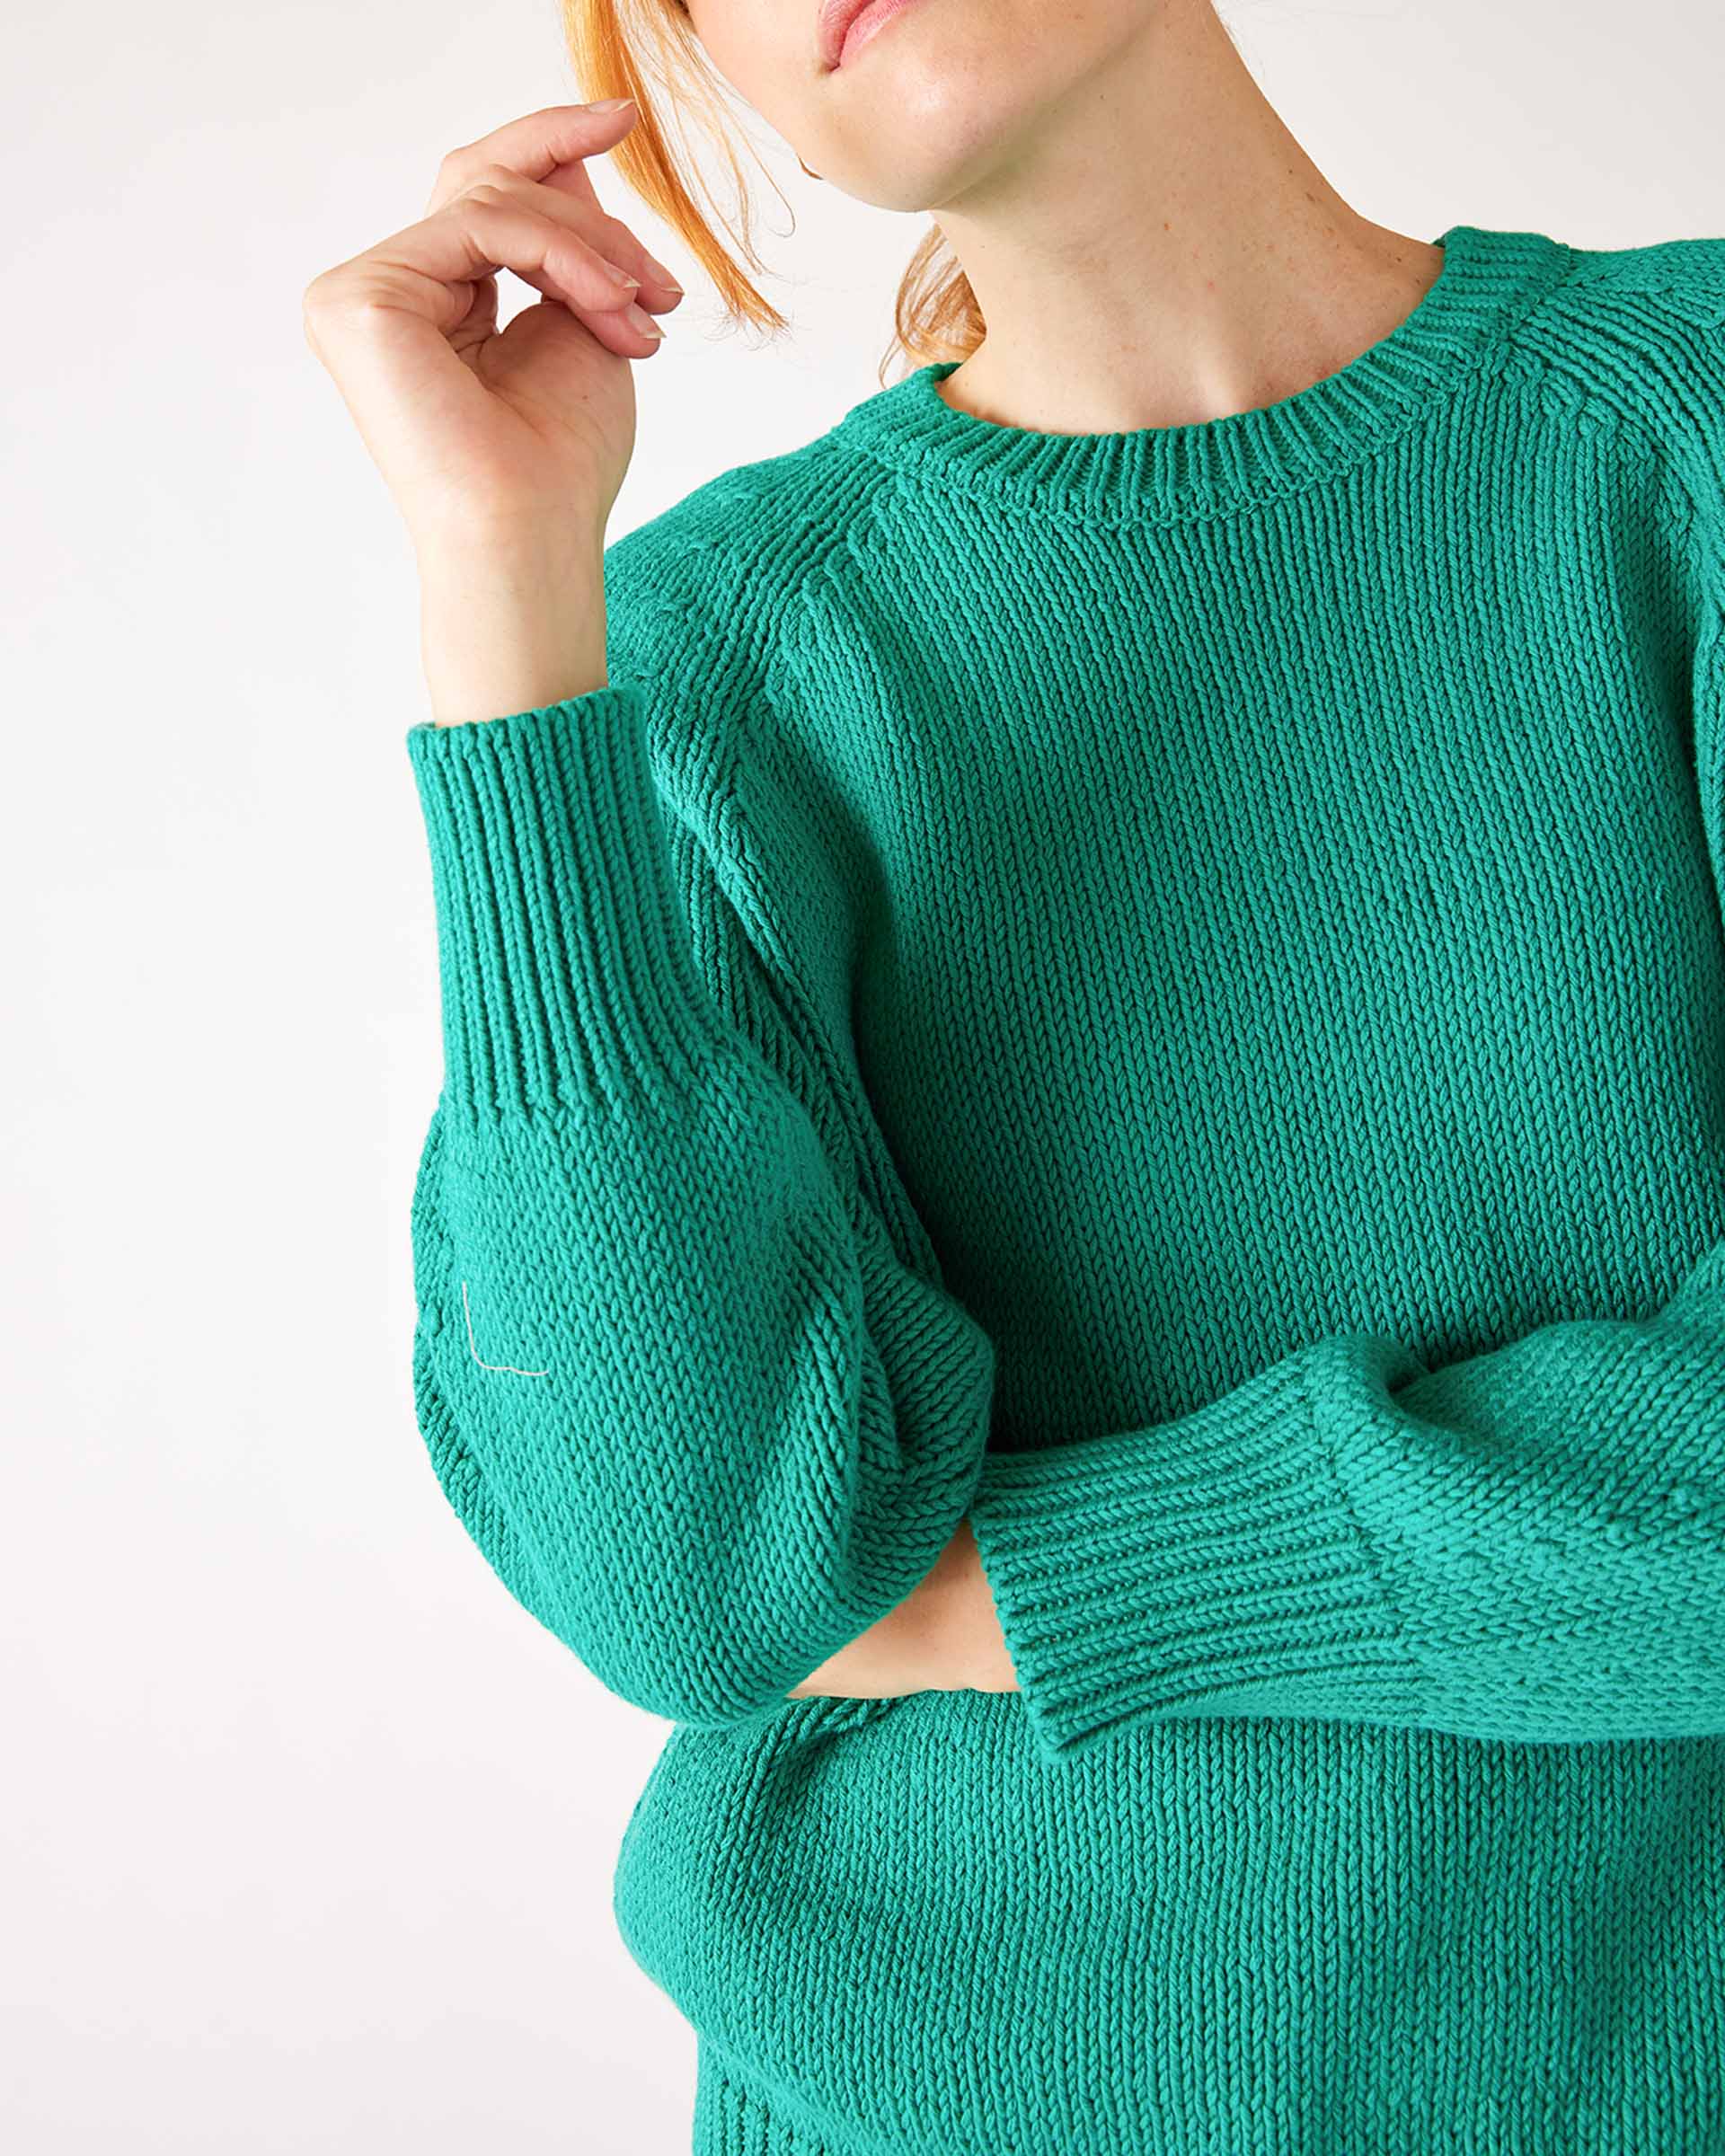 Women's Kelly Green Soft Crewneck Stitched Sweater Front View Close Up Cuff Detail